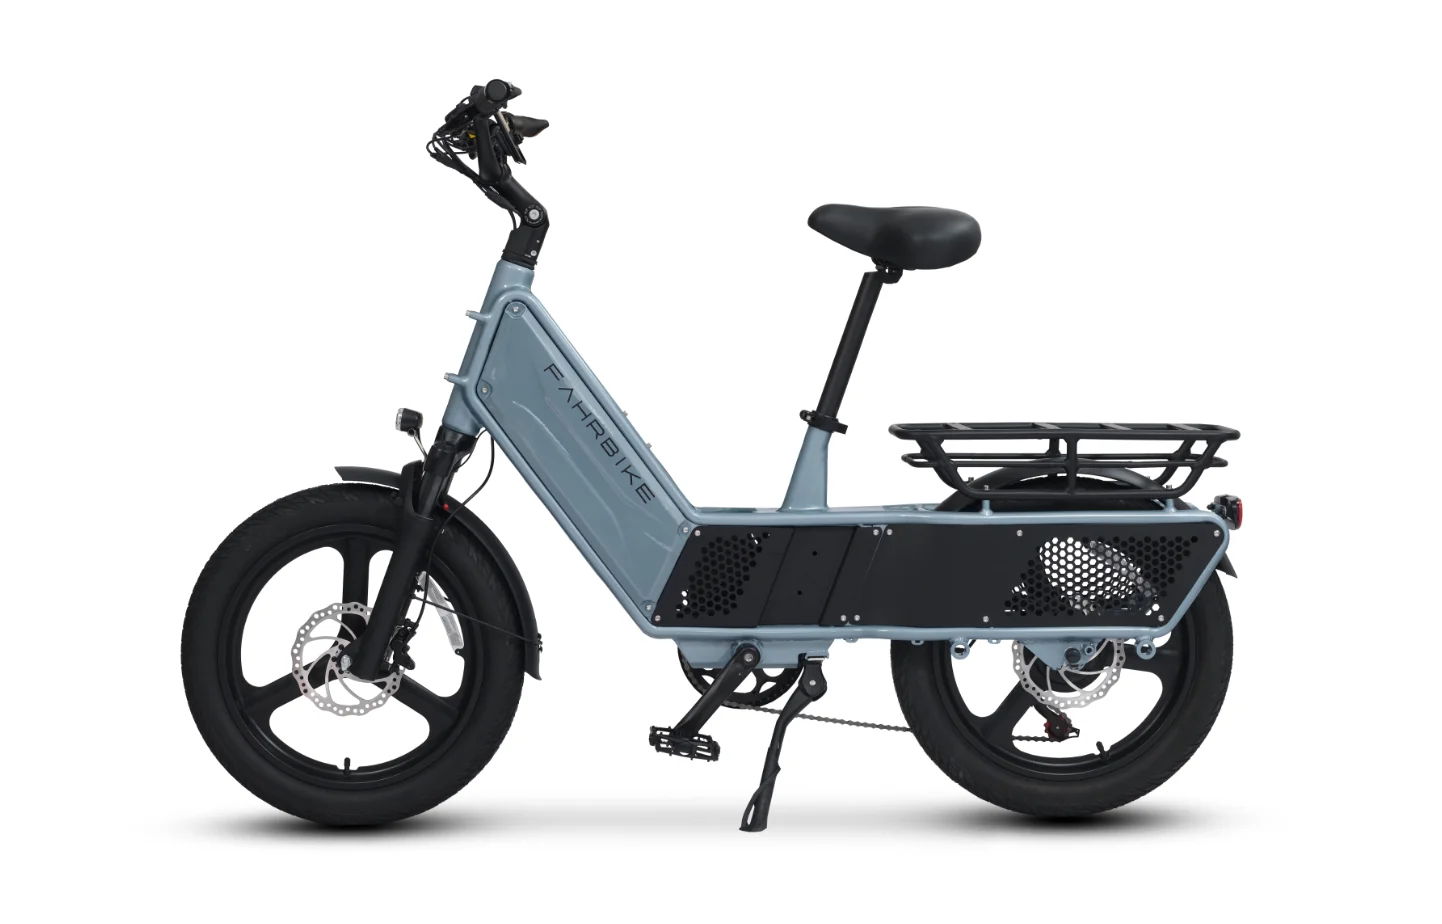 Fahrbike’s Affordable UrbanCarry Cargo / Utility E-Bikes Come In 3 Sizes